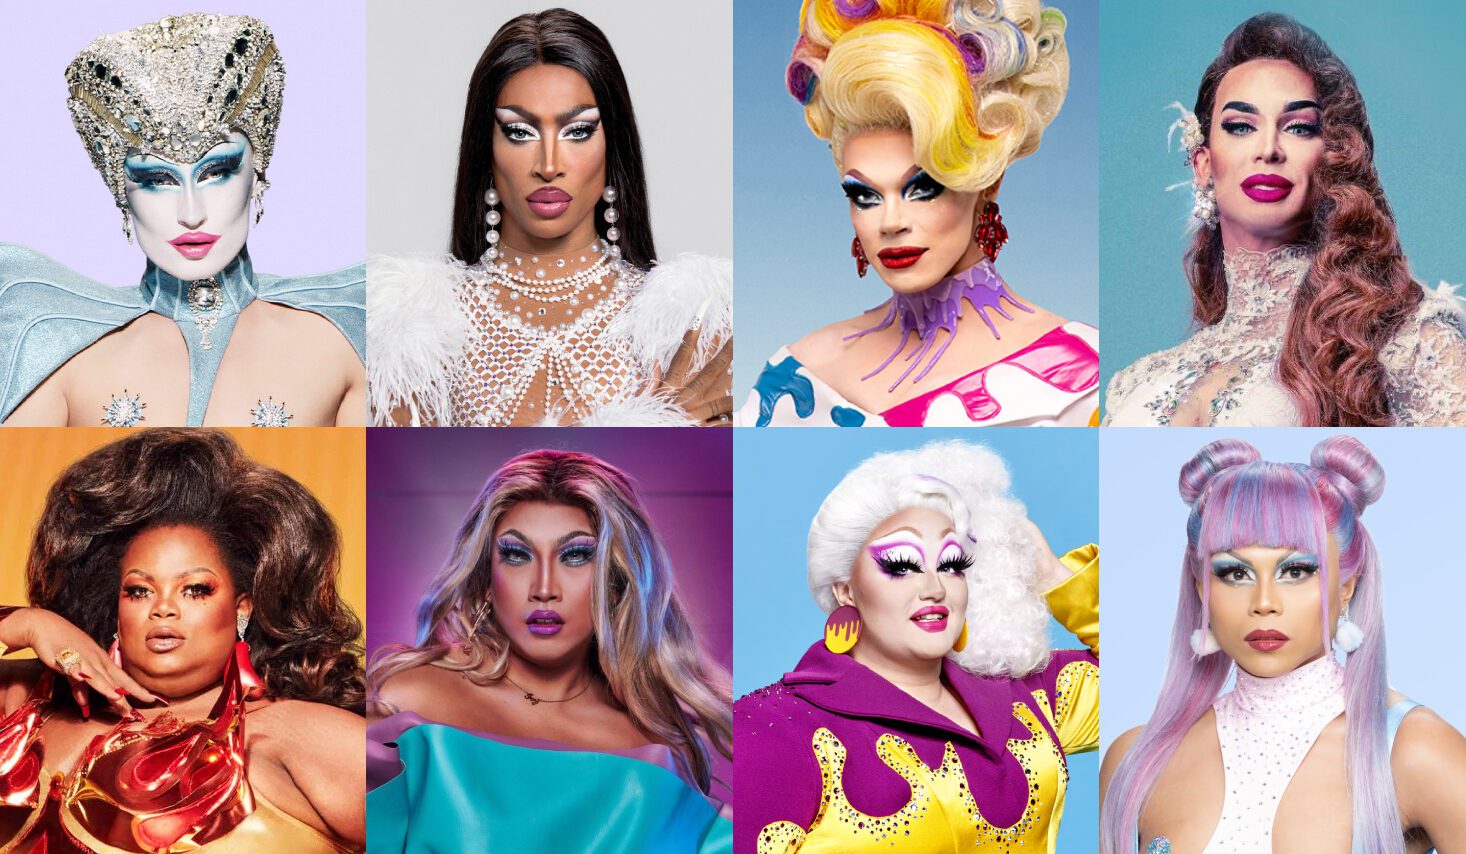 Here’s your guide to the RuPaul’s Drag Race franchise in 2021